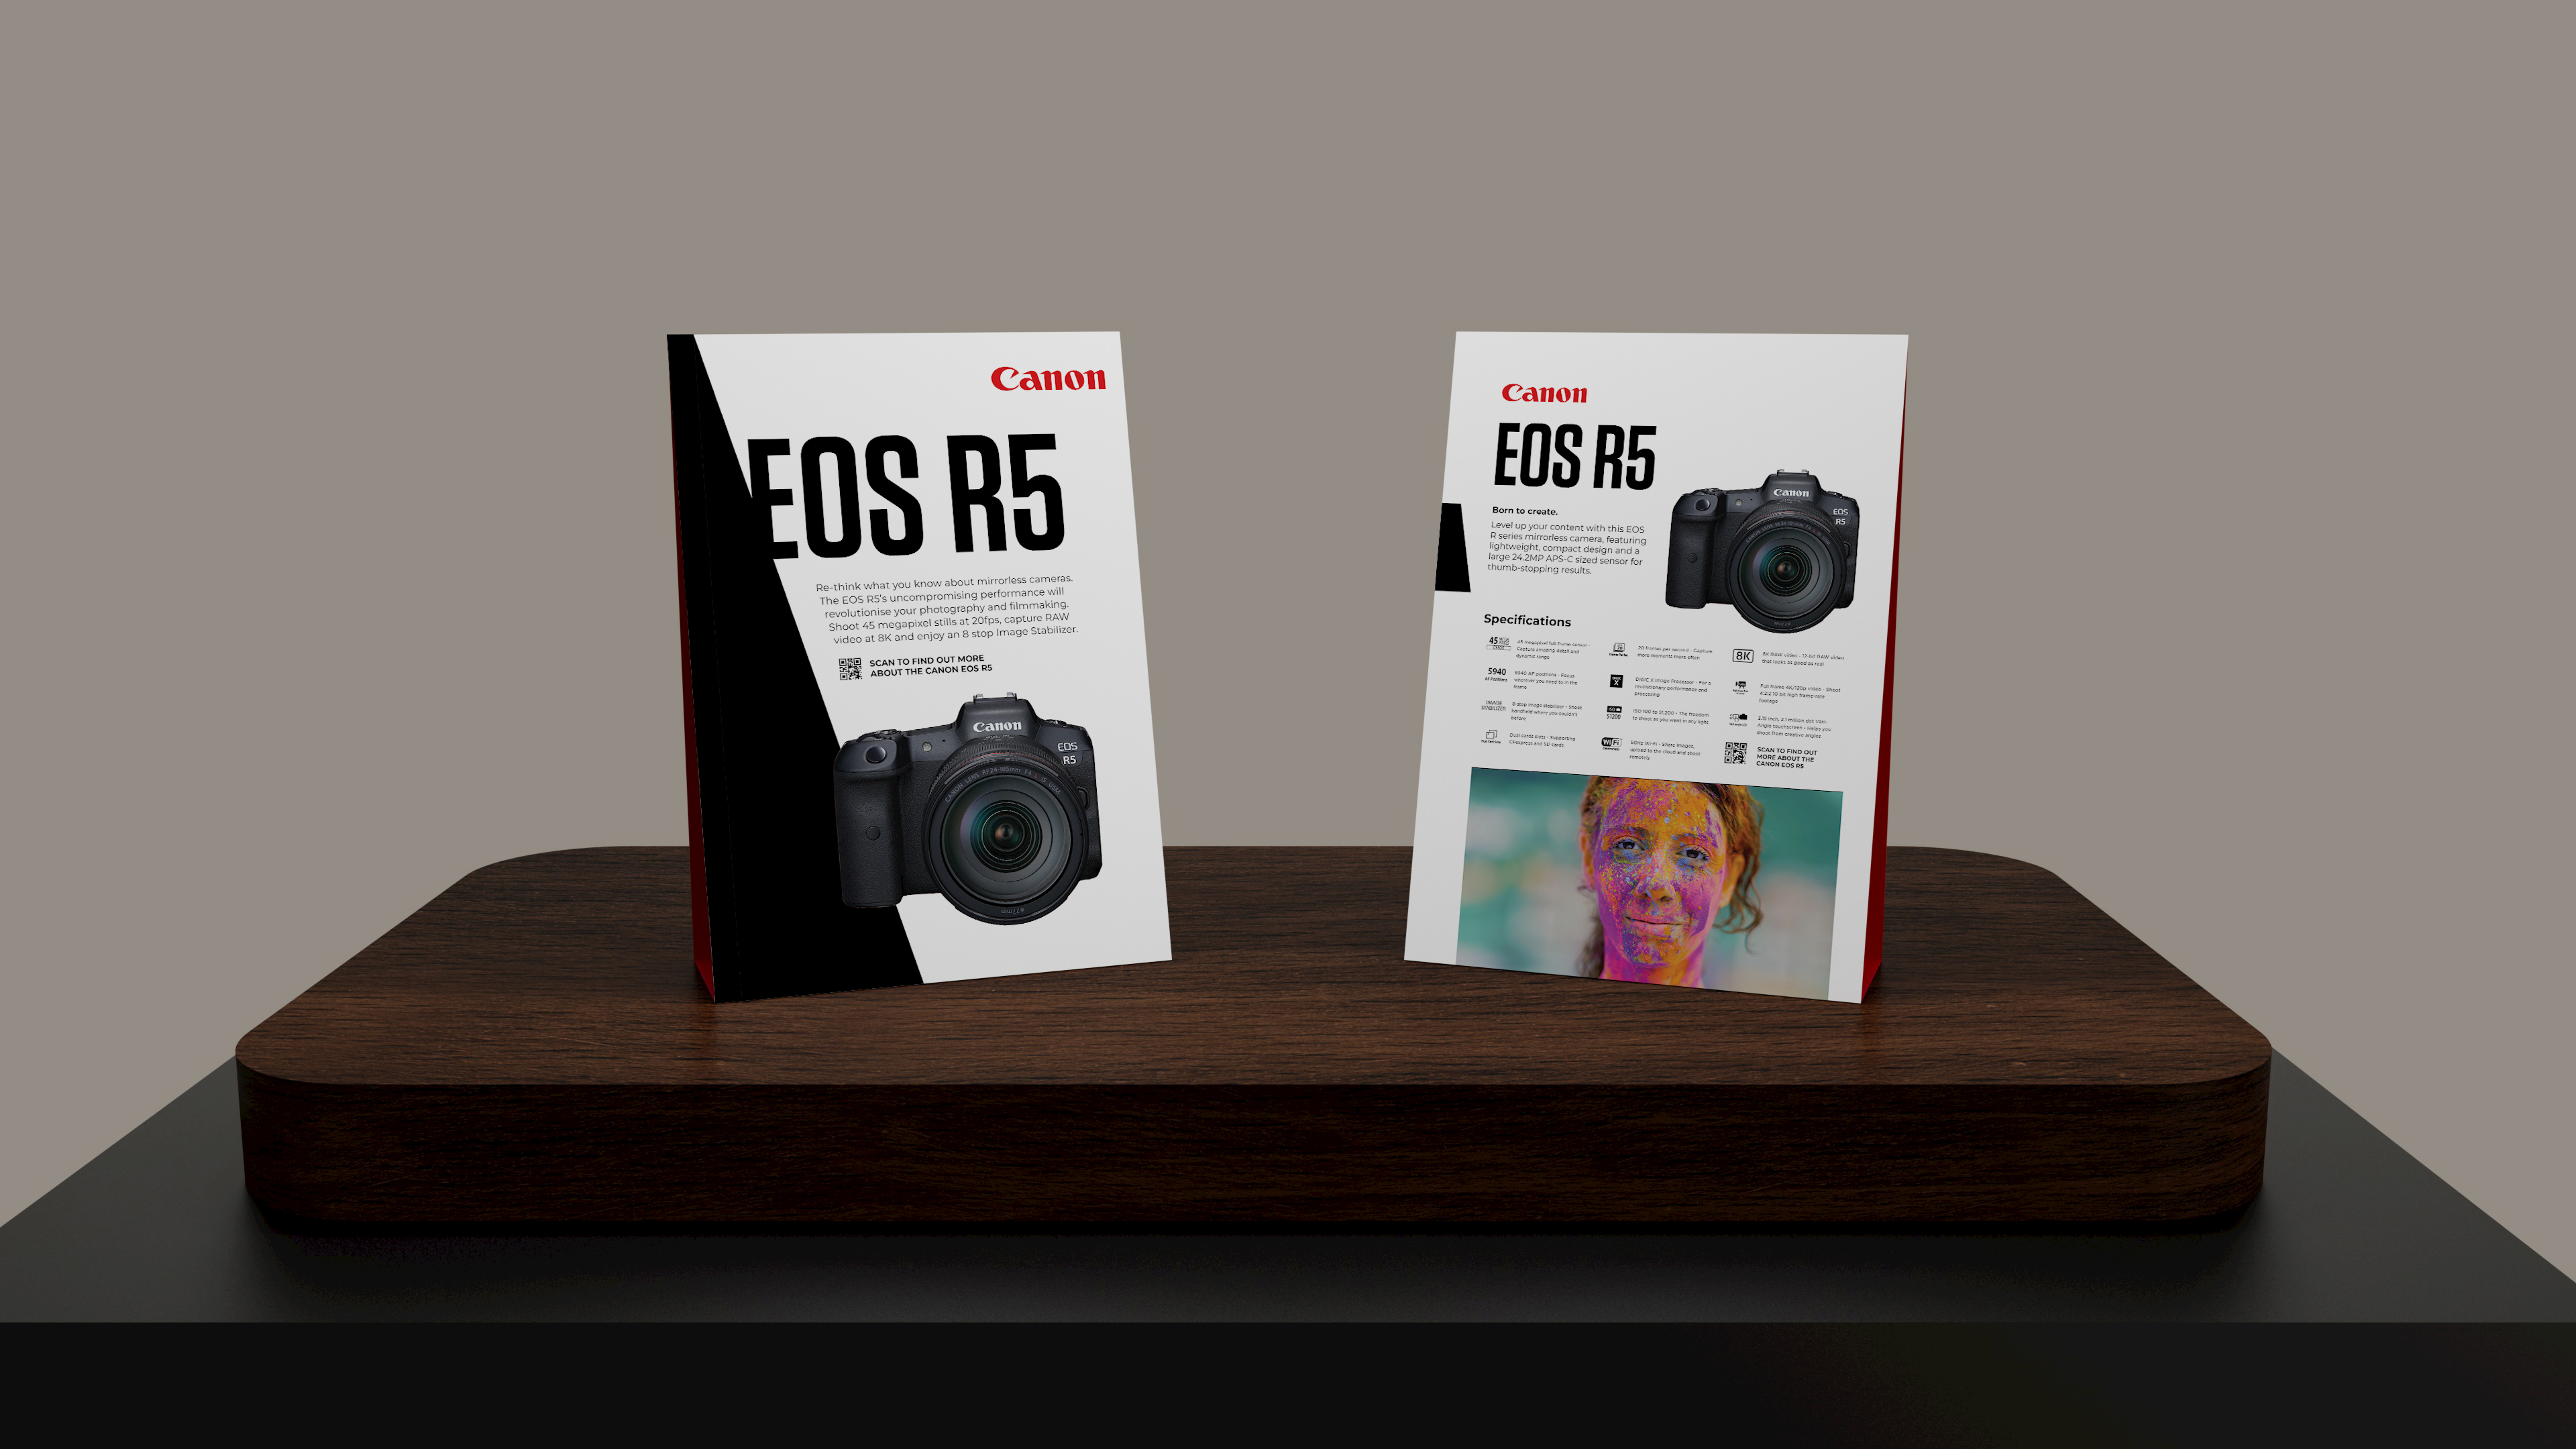 CAN08154_Canon_Retail_Refresh_Tent_cards_EOS_R5